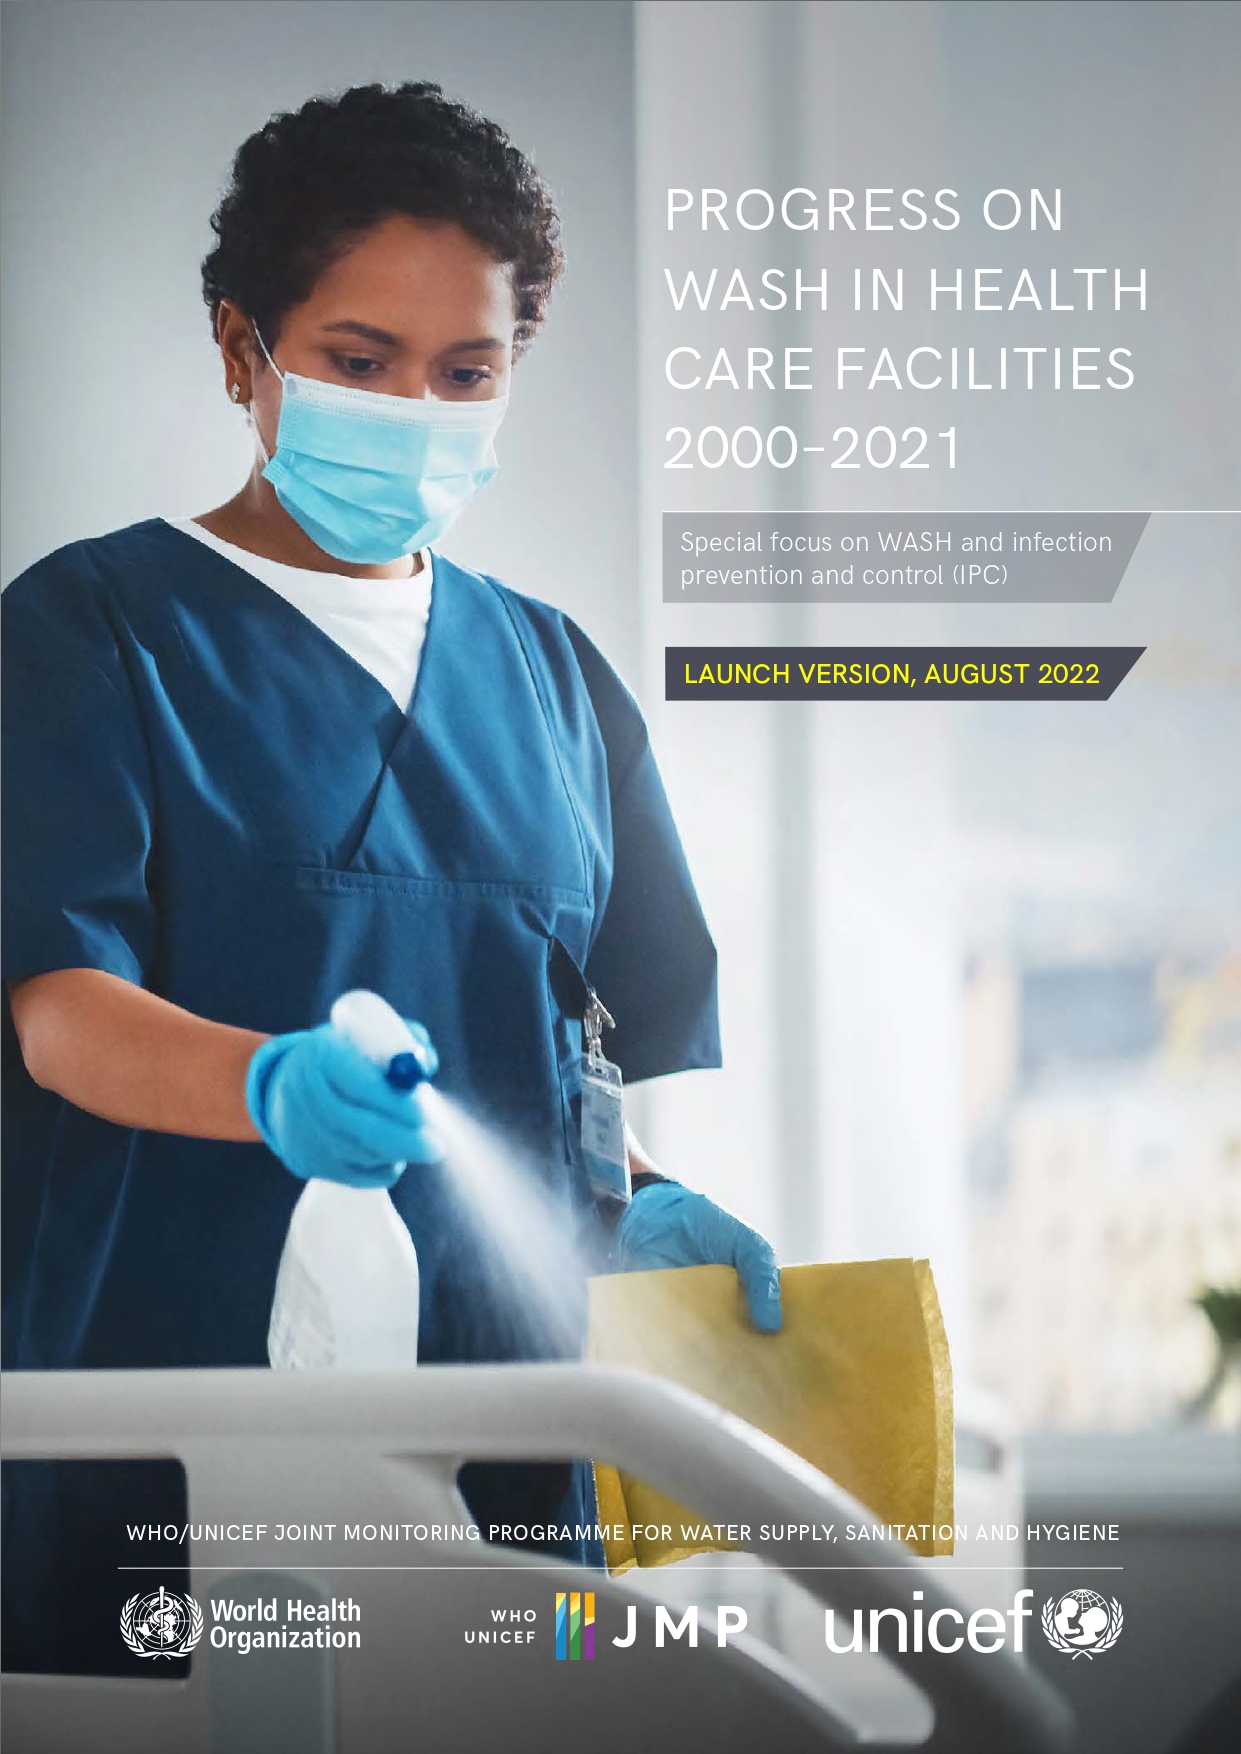 Progress on WASH in health care facilities 2000-2021: Special focus on WASH and infection prevention and control (IPC): WHO/UNICEF JOINT MONITORING PROGRAMME FOR WATER SUPPLY, SANITATION AND HYGIENE